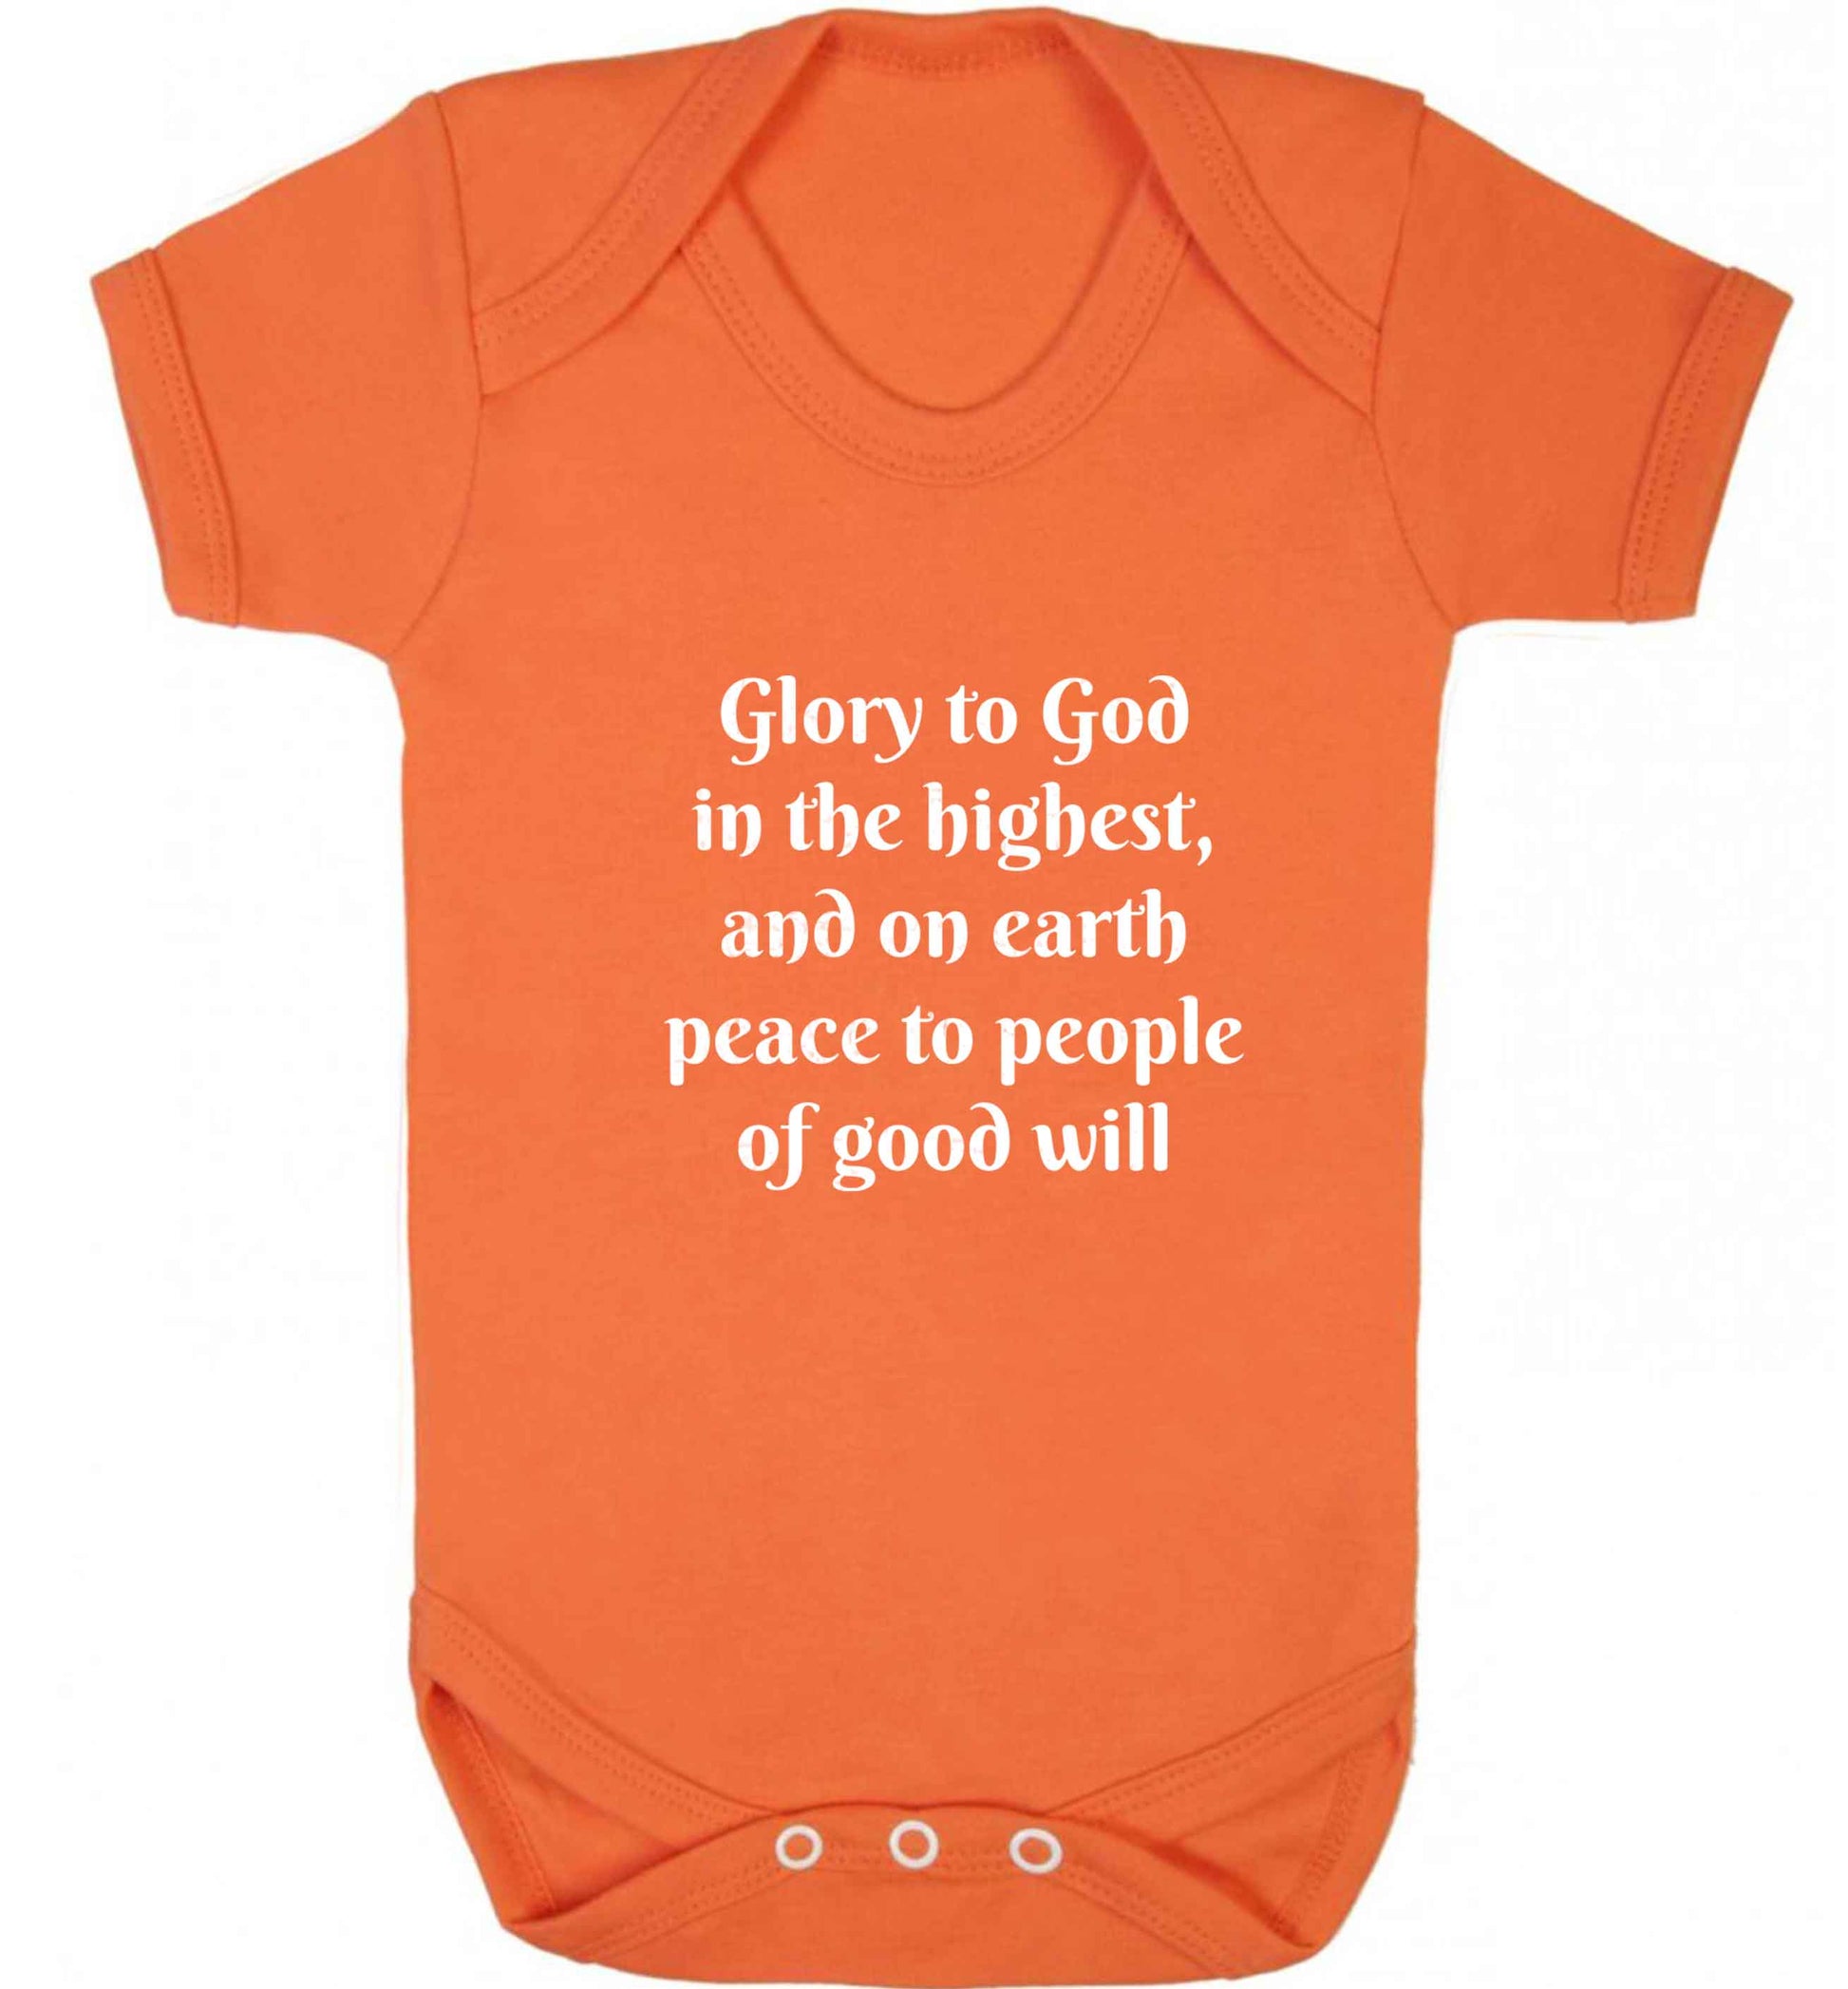 Glory to God in the highest, and on earth peace to people of good will baby vest orange 18-24 months